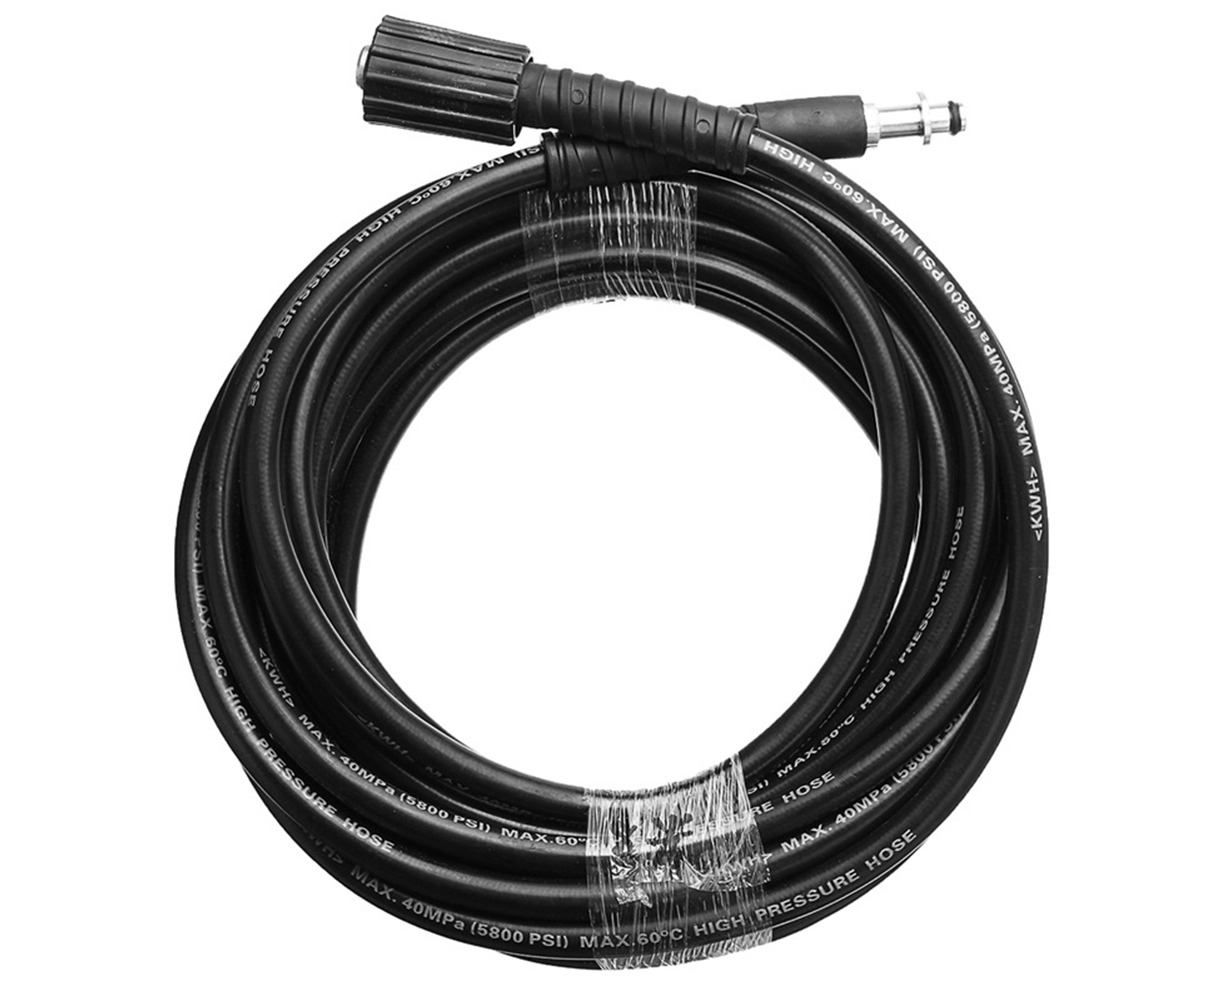 High Pressure Washer Water Clean Hose Car Cleaning Pipe Fit for K2 K3 K4 K5 10m Washer Hose 